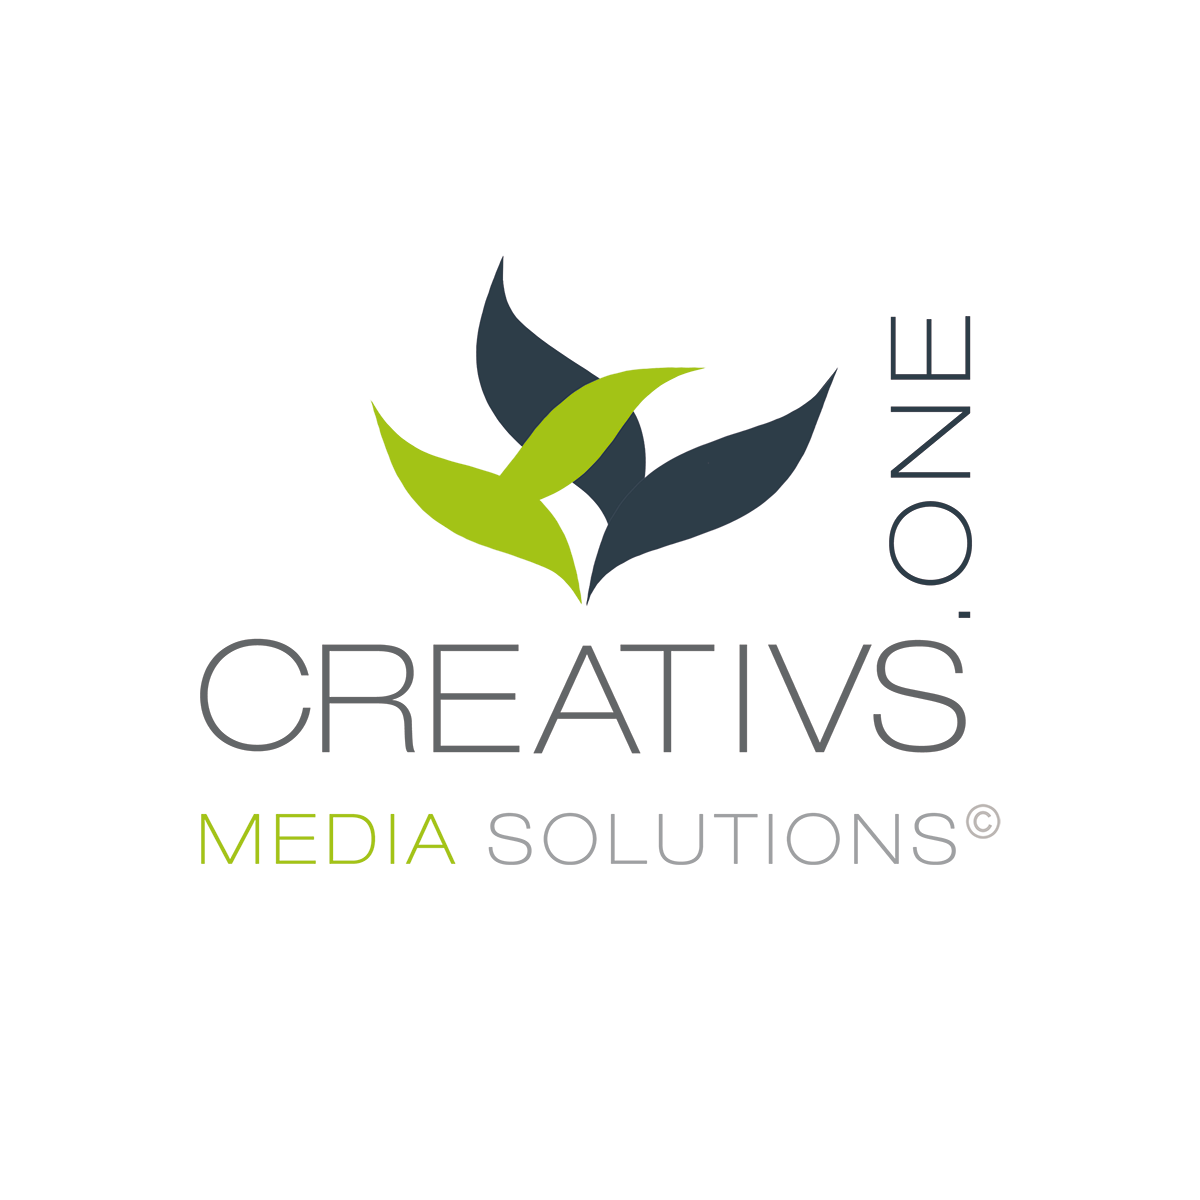 CREATIVS.ONE | MEDIA SOLUTIONS